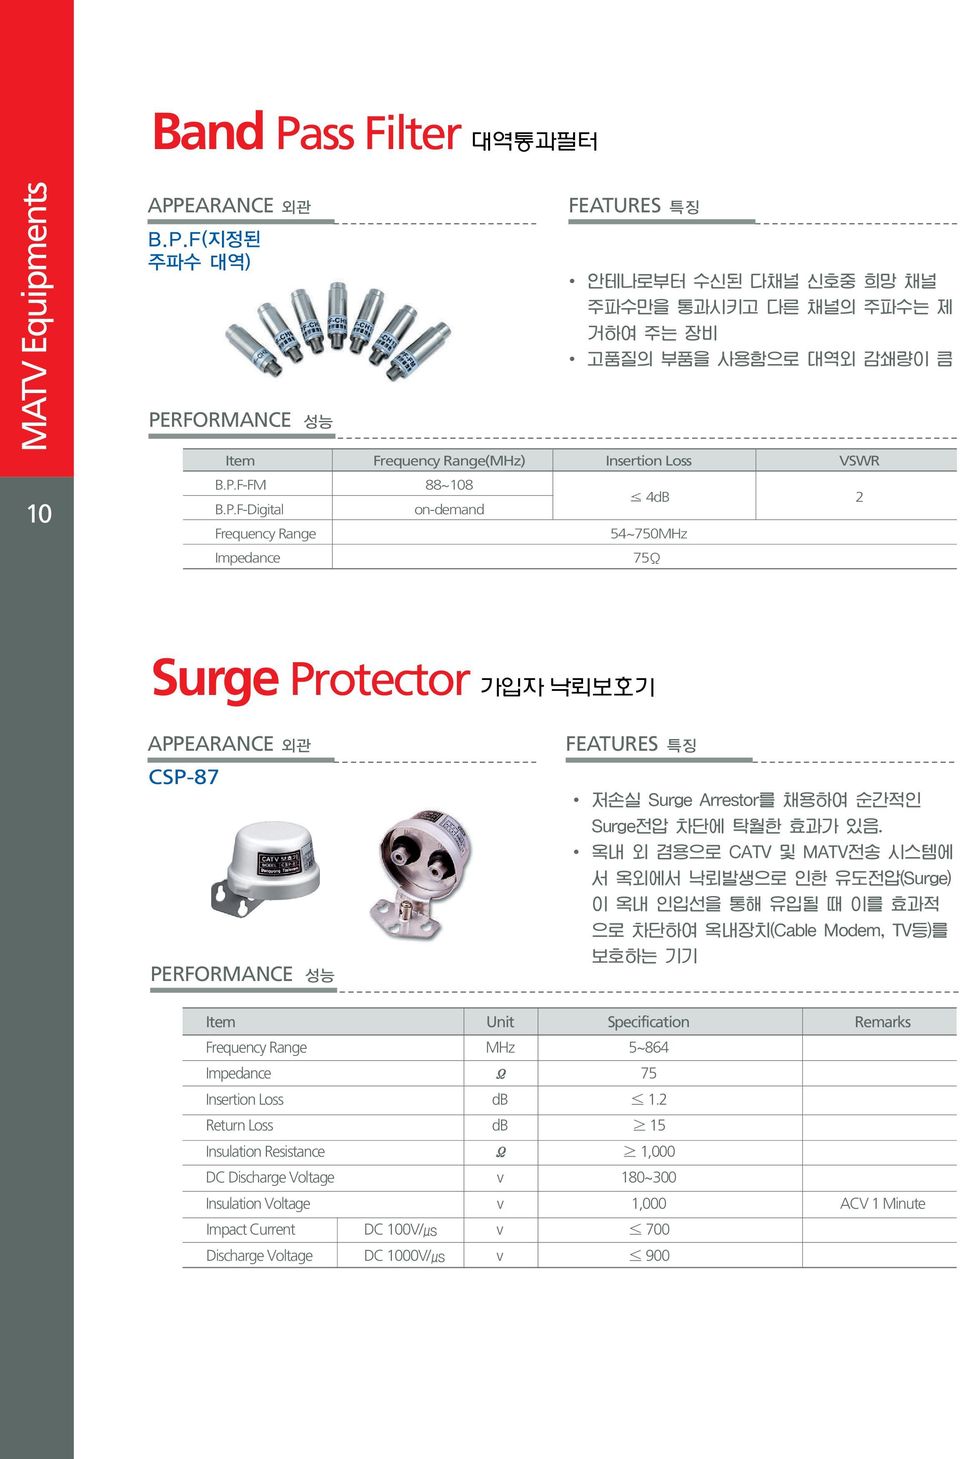 Specification Remarks Frequency Range MHz 5~864 Impedance 75 Insertion Loss db 1.